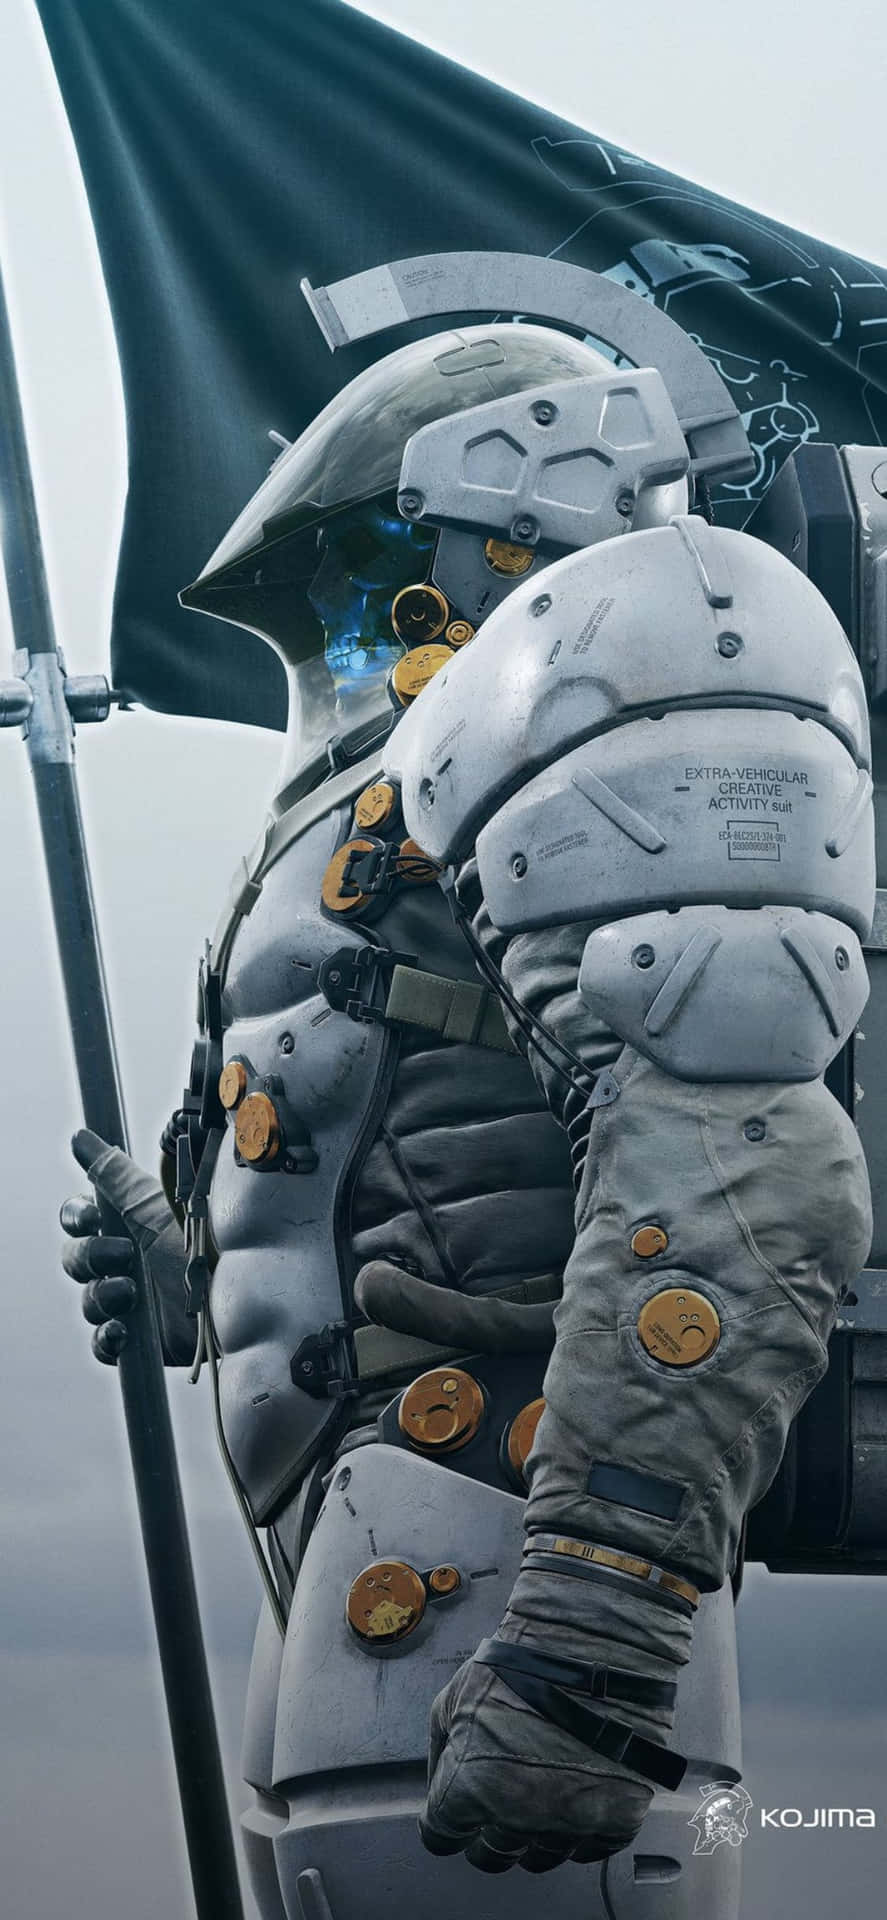 Explore the world of Death Stranding with the Iphone X